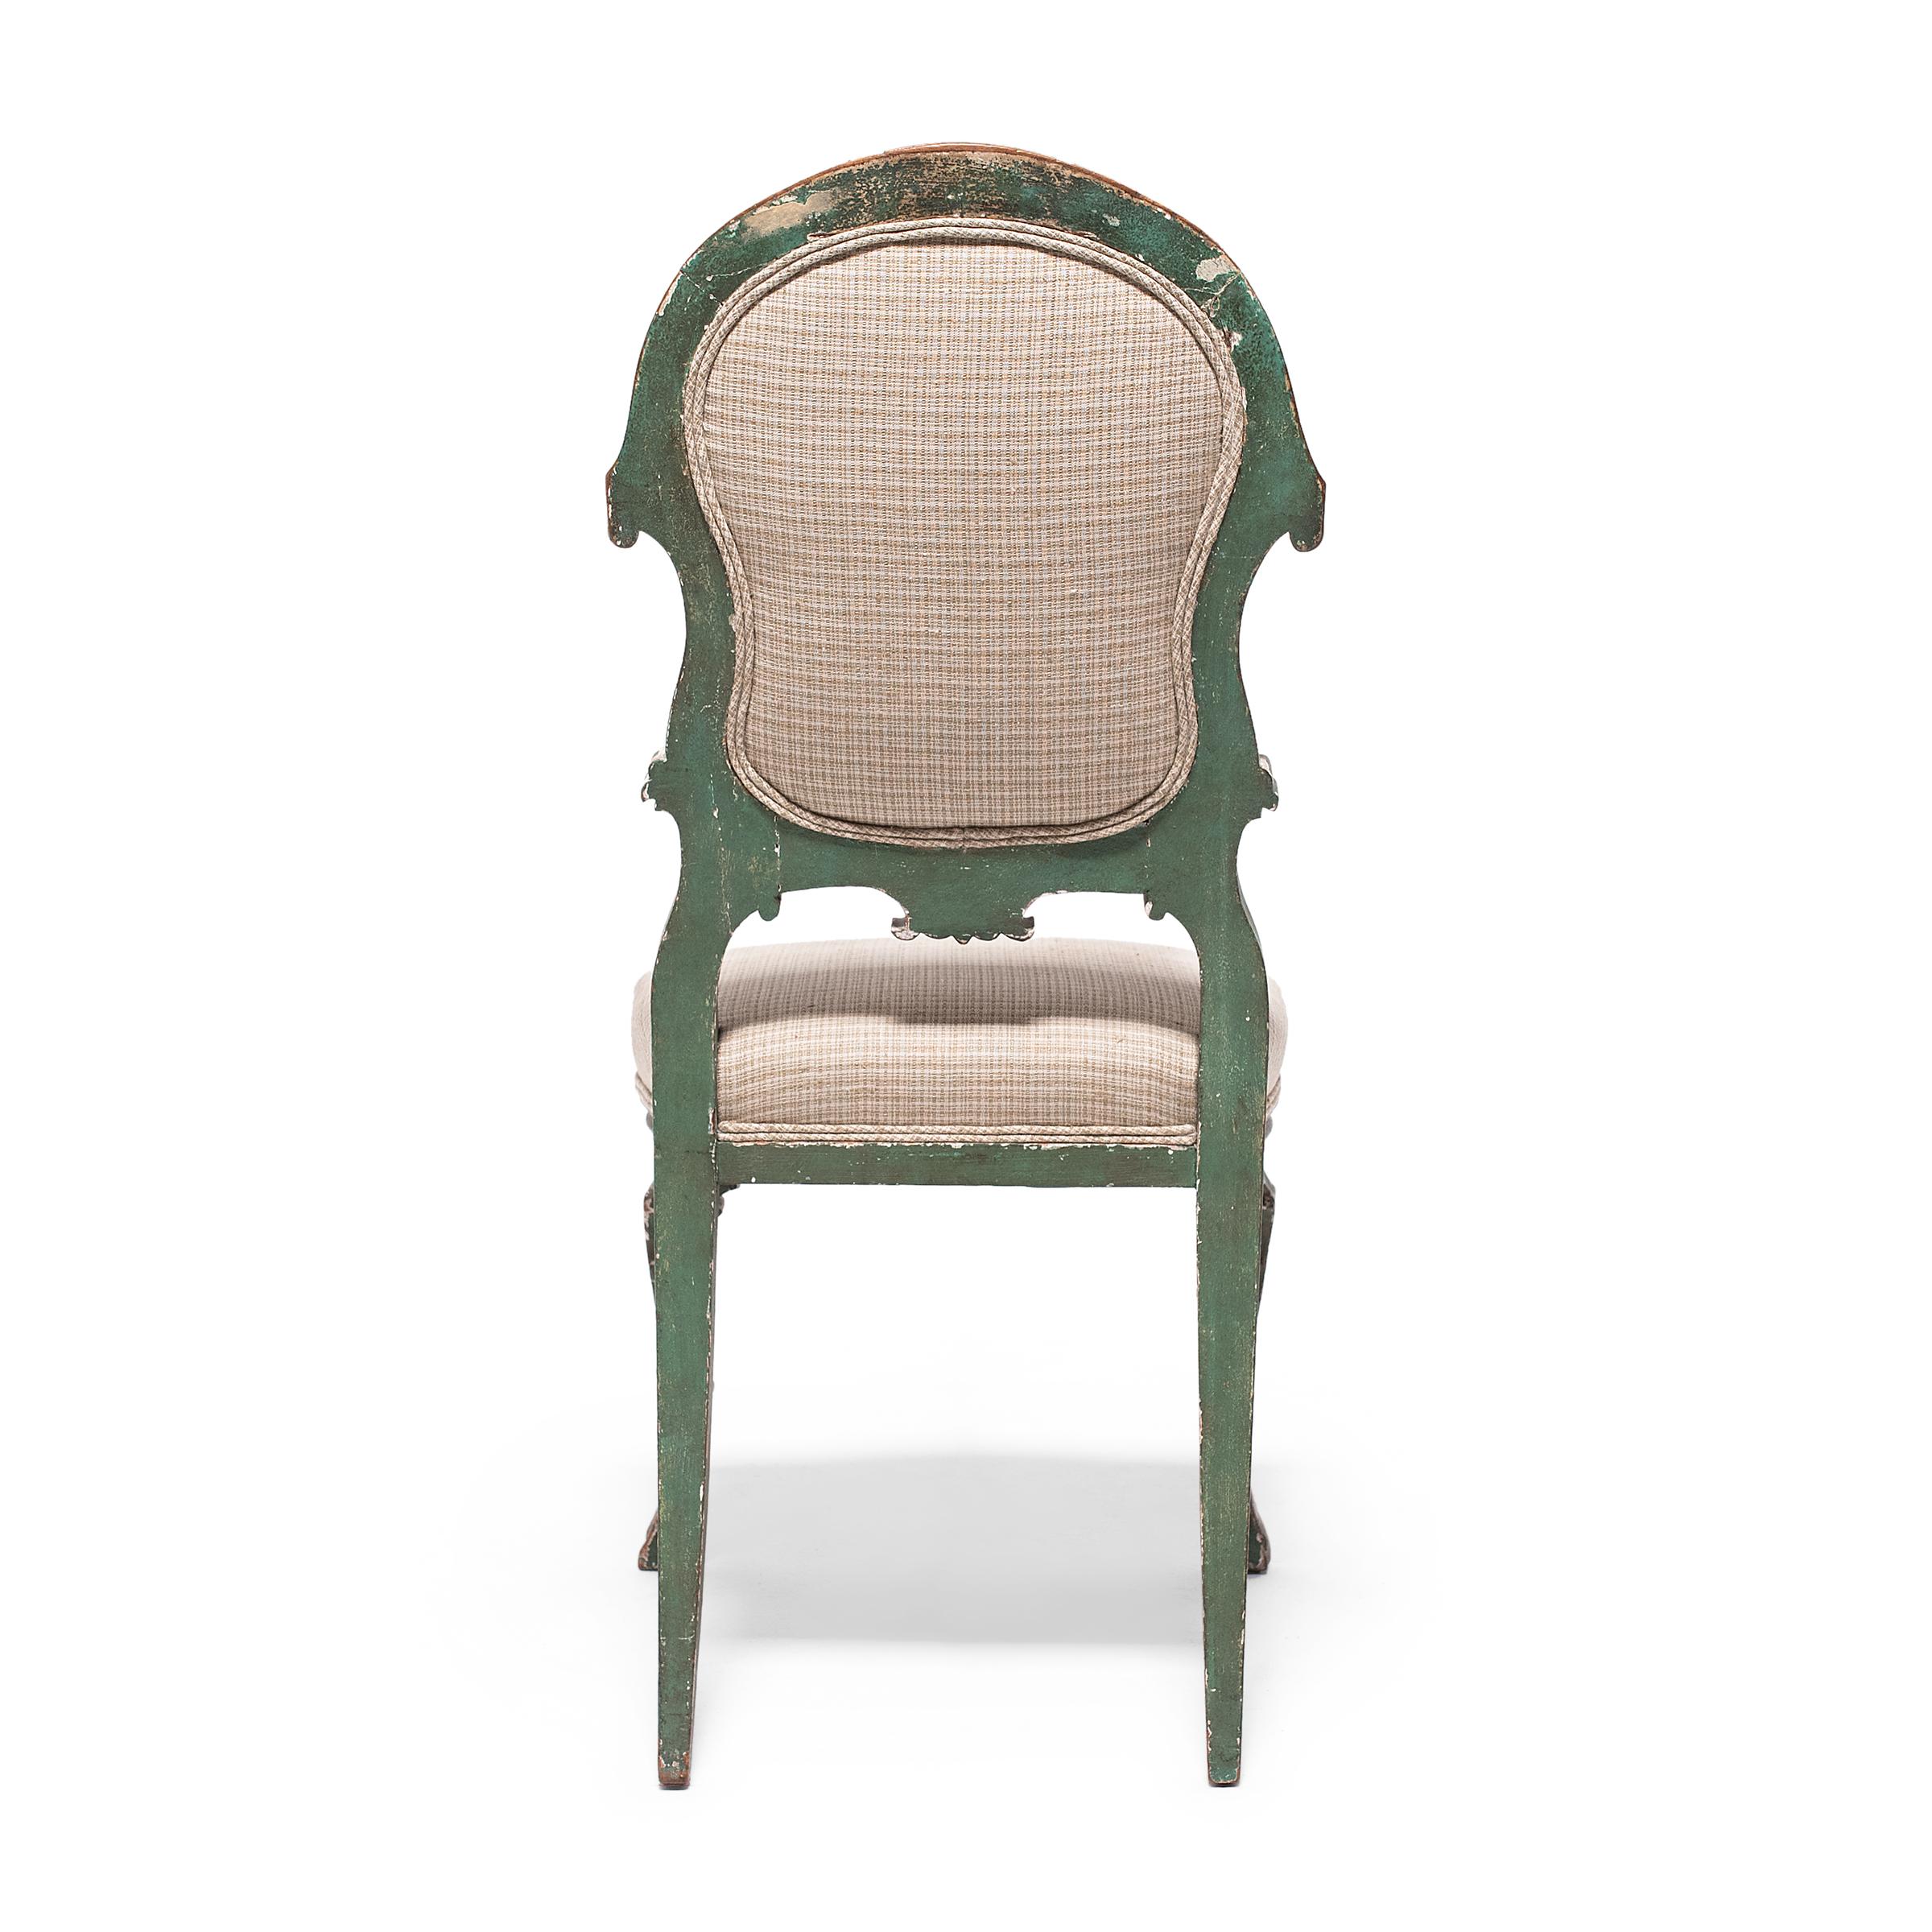 Italian Painted Dining Chair, C. 1800 In Good Condition For Sale In Chicago, IL